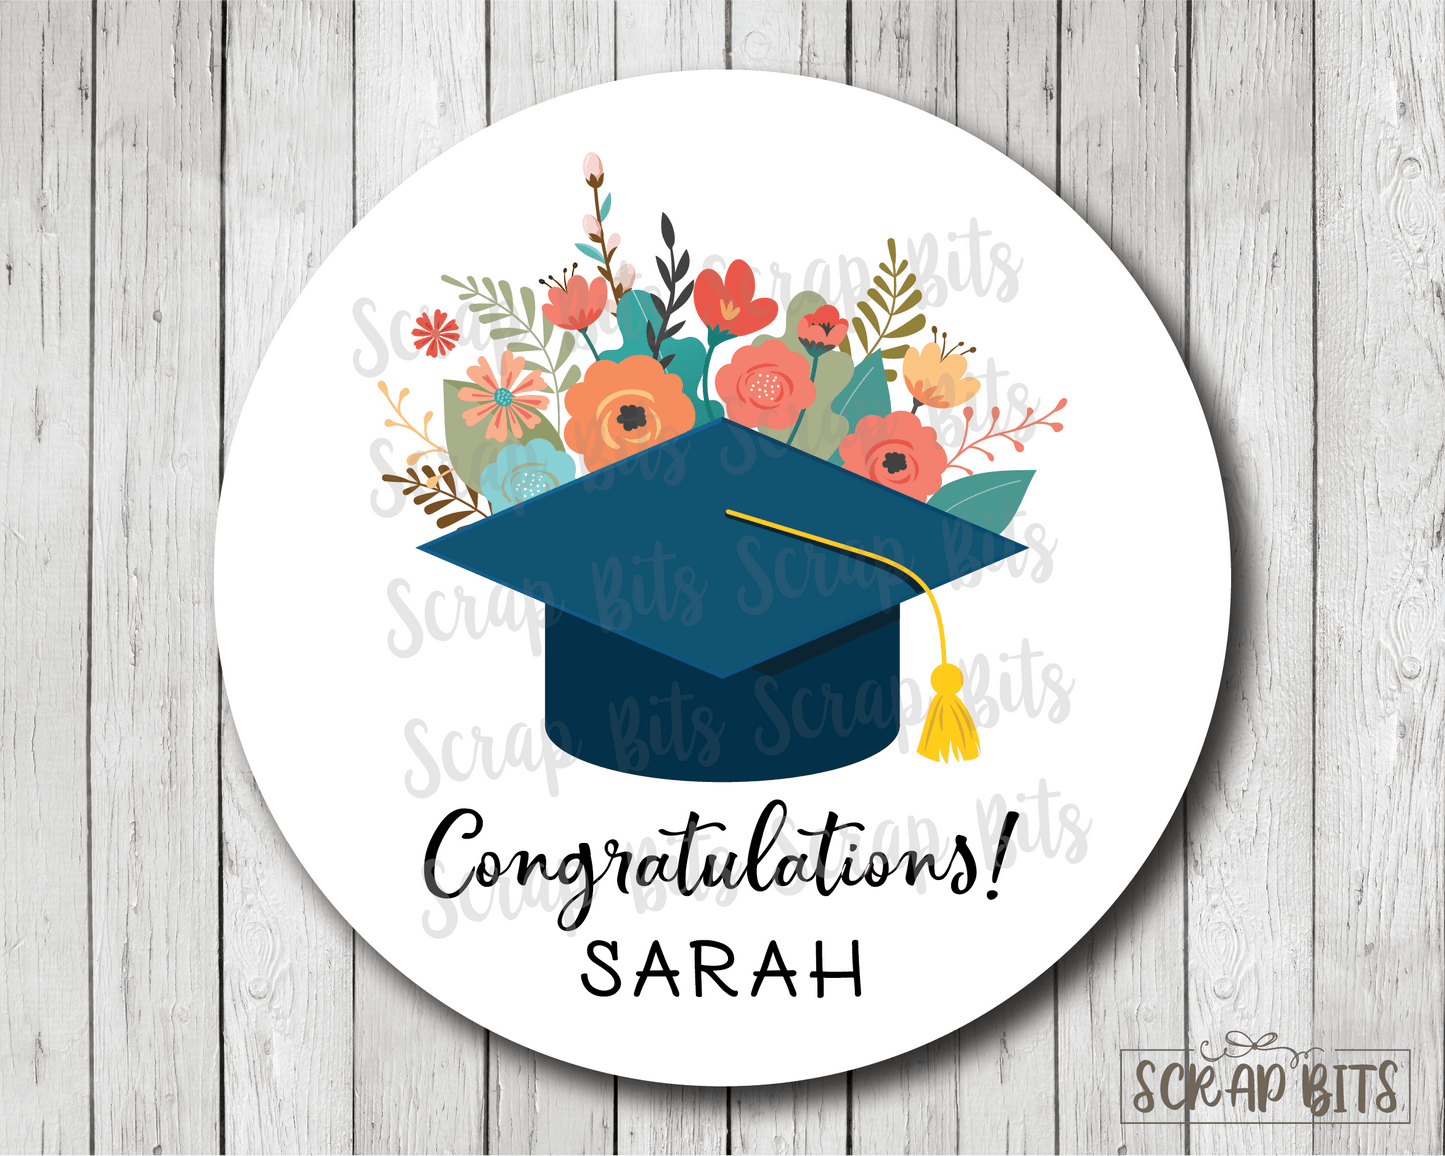 Graduation Cap with Flowers . Graduation Stickers or Tags - Scrap Bits